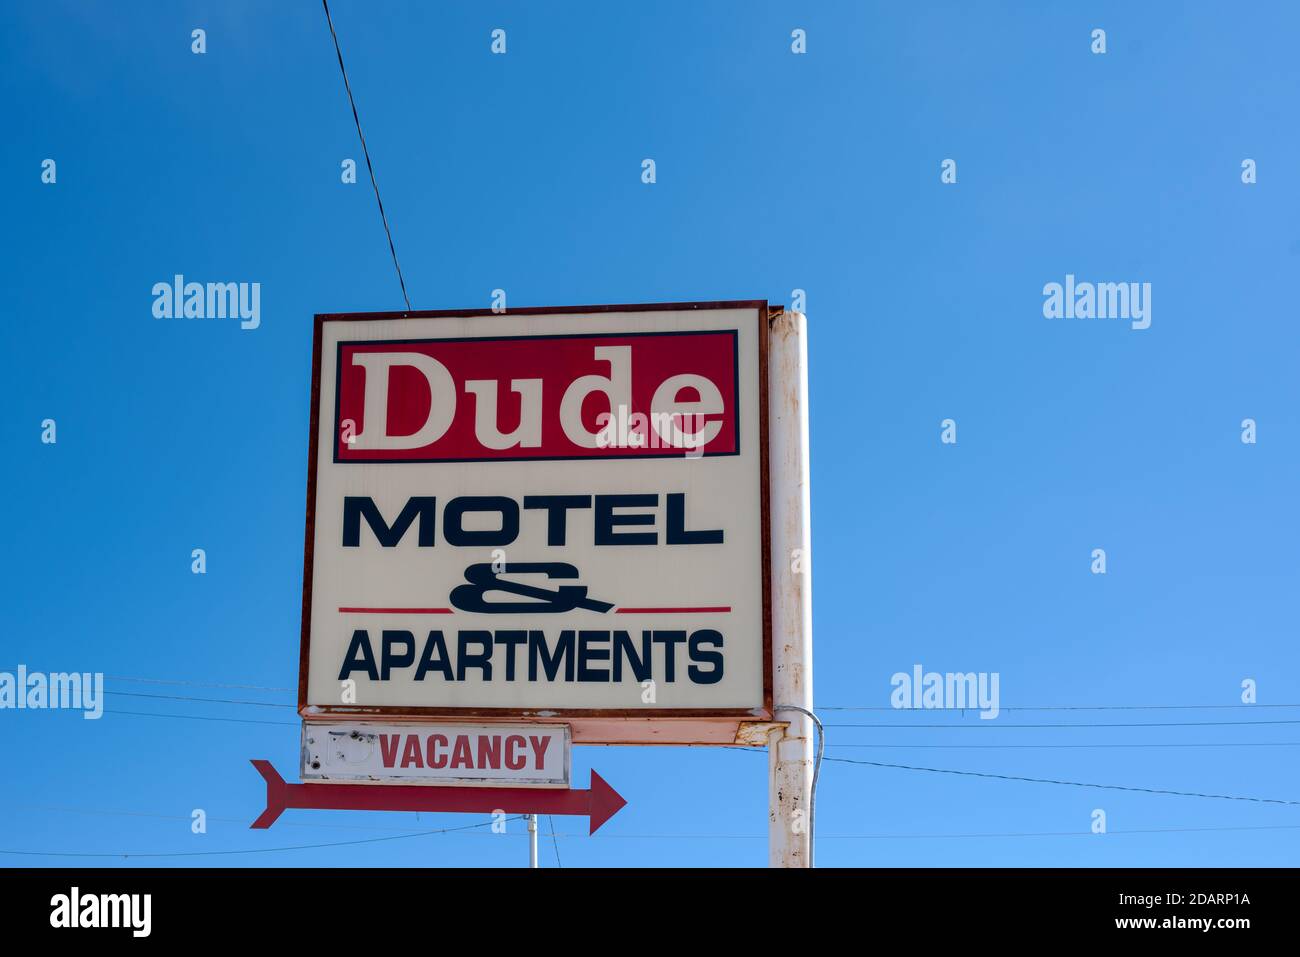 A red and white sign backed by a blue sky advertises a vacancy for motel rooms and apartments in the Dude Motel in Truth or Consequences, New Mexico. Stock Photo